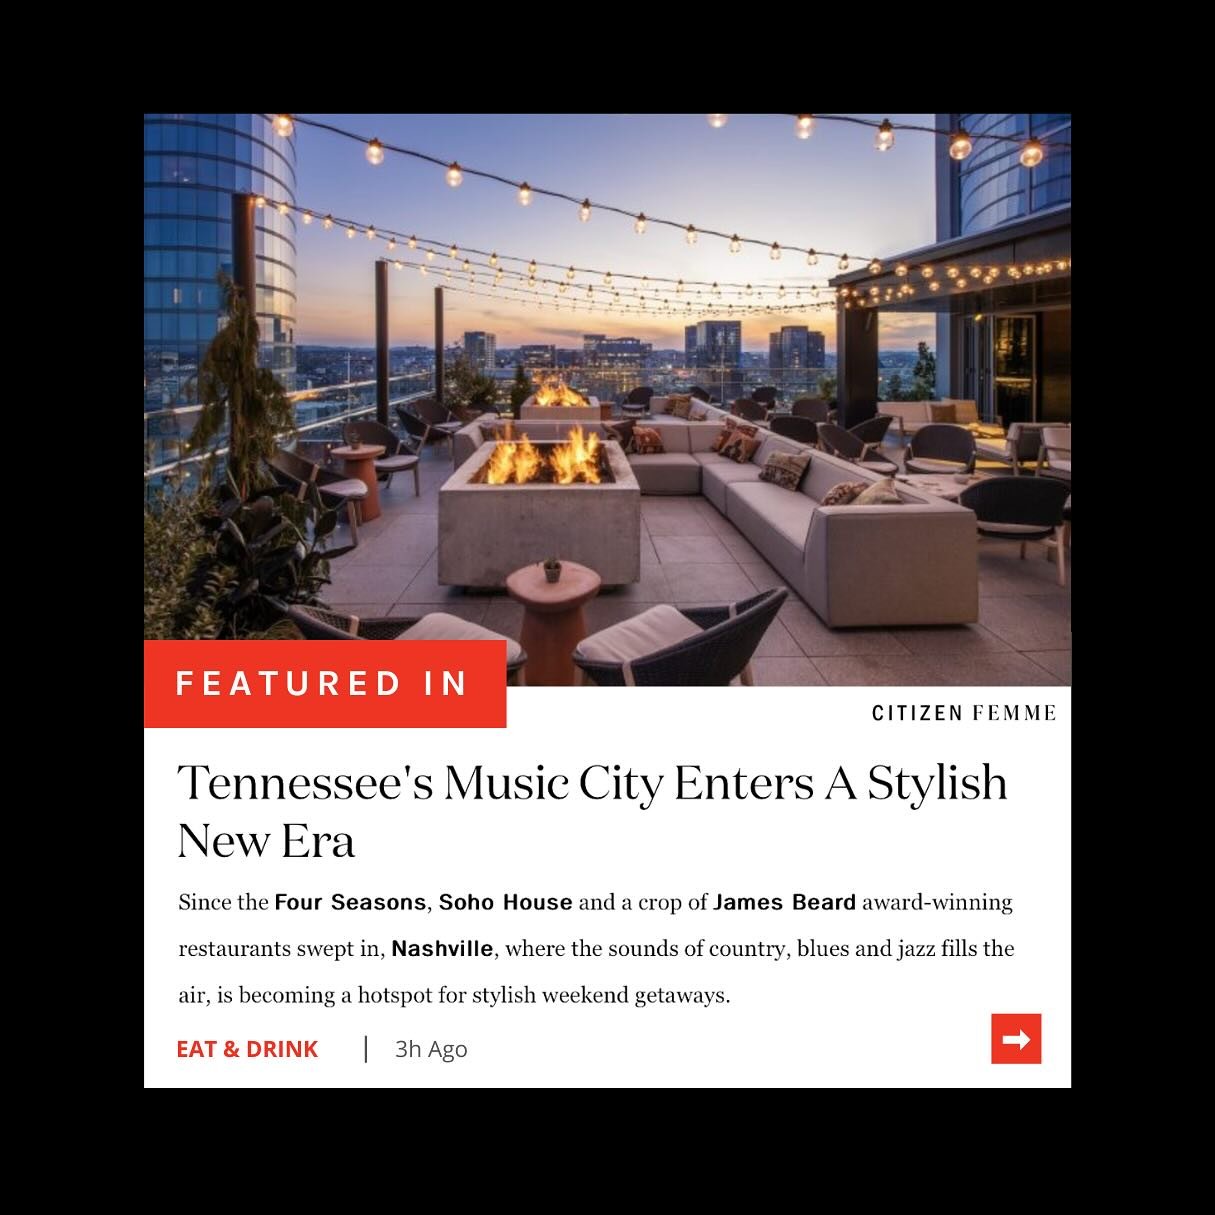 🎶✨ Nashville&rsquo;s star is shining brighter than ever, and Deacon&rsquo;s New South is at the heart of it all! 🌟 Thrilled to be featured in the latest @citizenfemme article, &lsquo;Tennessee&rsquo;s Music City Enters A Stylish New Era,&rsquo; hig